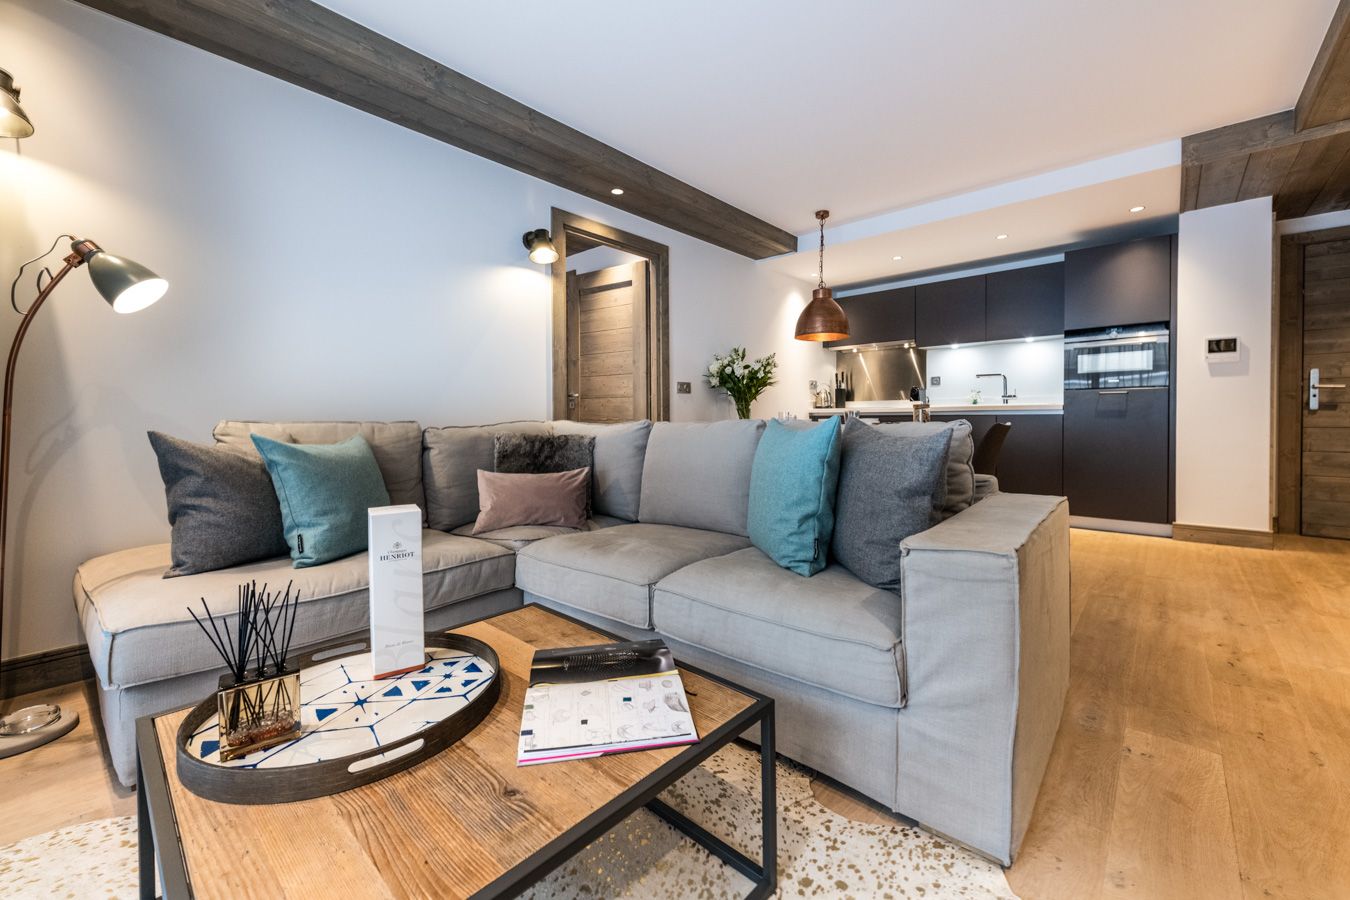 3 bed Apartment For Sale in Portes du Soleil, French Alps